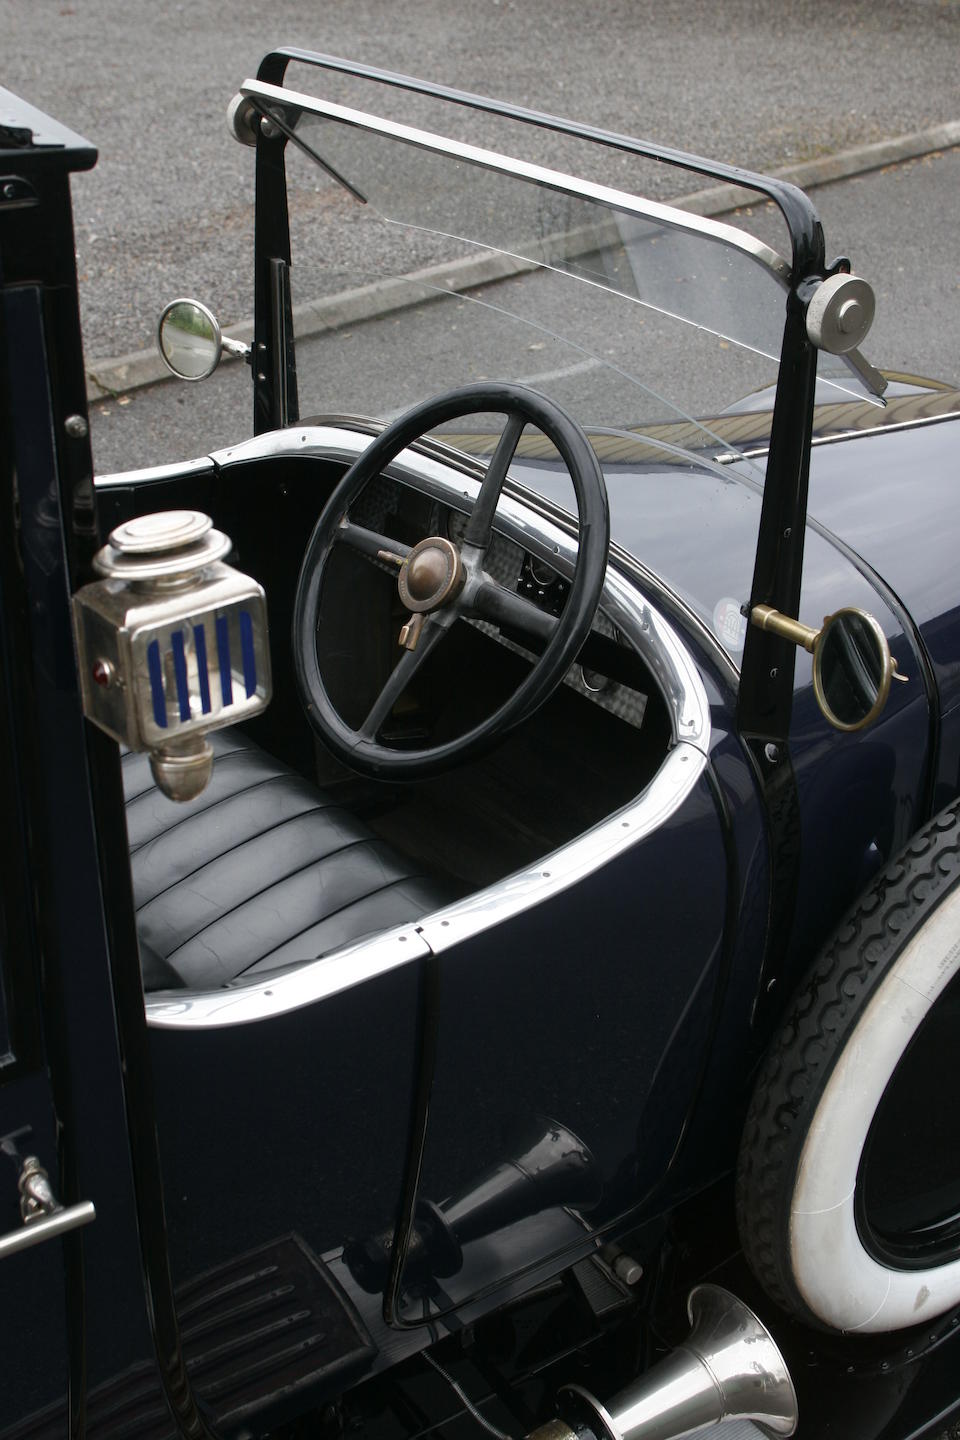 Former transport to the French government ,1921 Avions Voisin OC1 'Presidential' Coup&#233;  Chassis no. 543 Engine no. 543